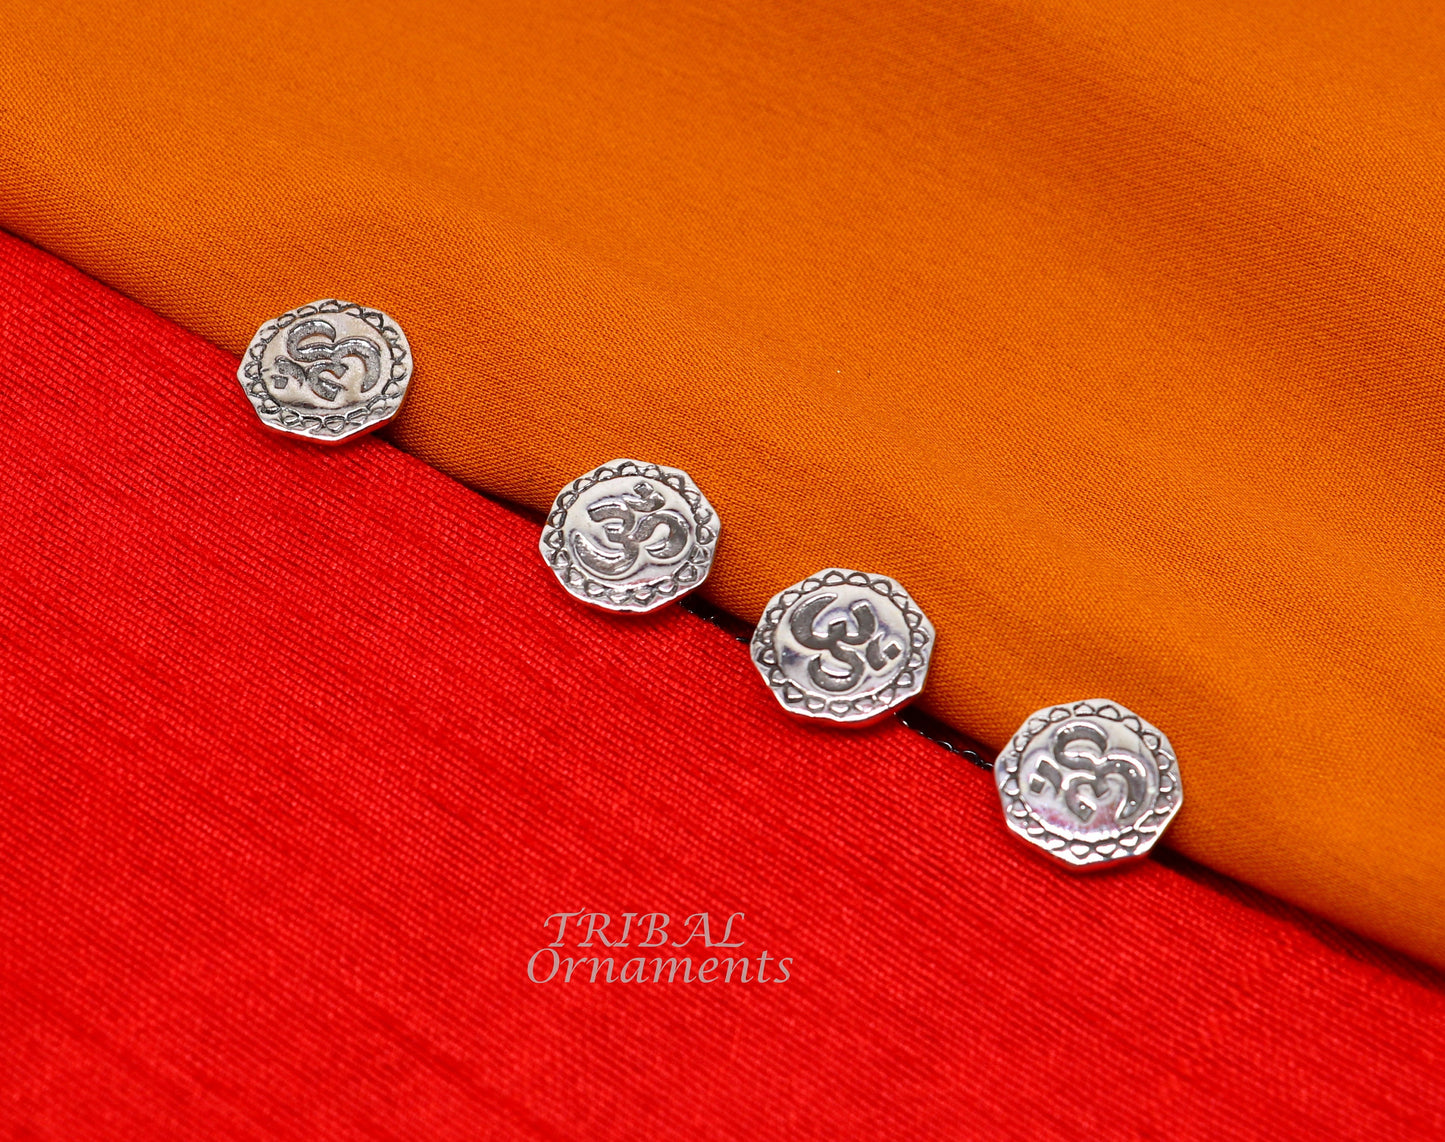 925 Sterling silver handmade gorgeous sign Aum or OM design buttons or cufflinks  for men's kurta, best gifting jewelry occasions btn03 - TRIBAL ORNAMENTS